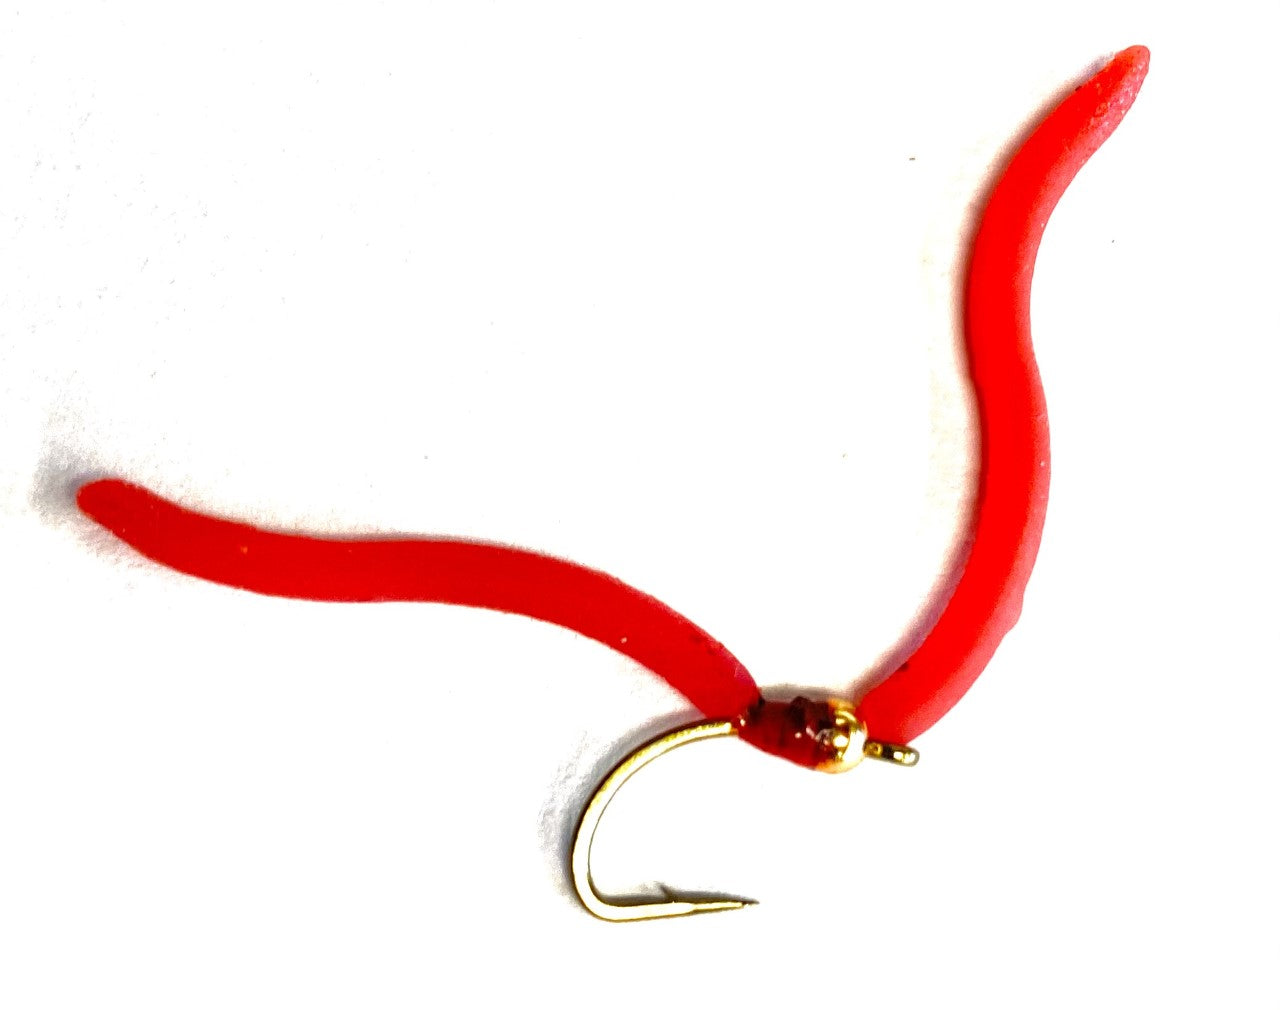 Rowley's Frost Bite Blood Worm – Out Fly Fishing